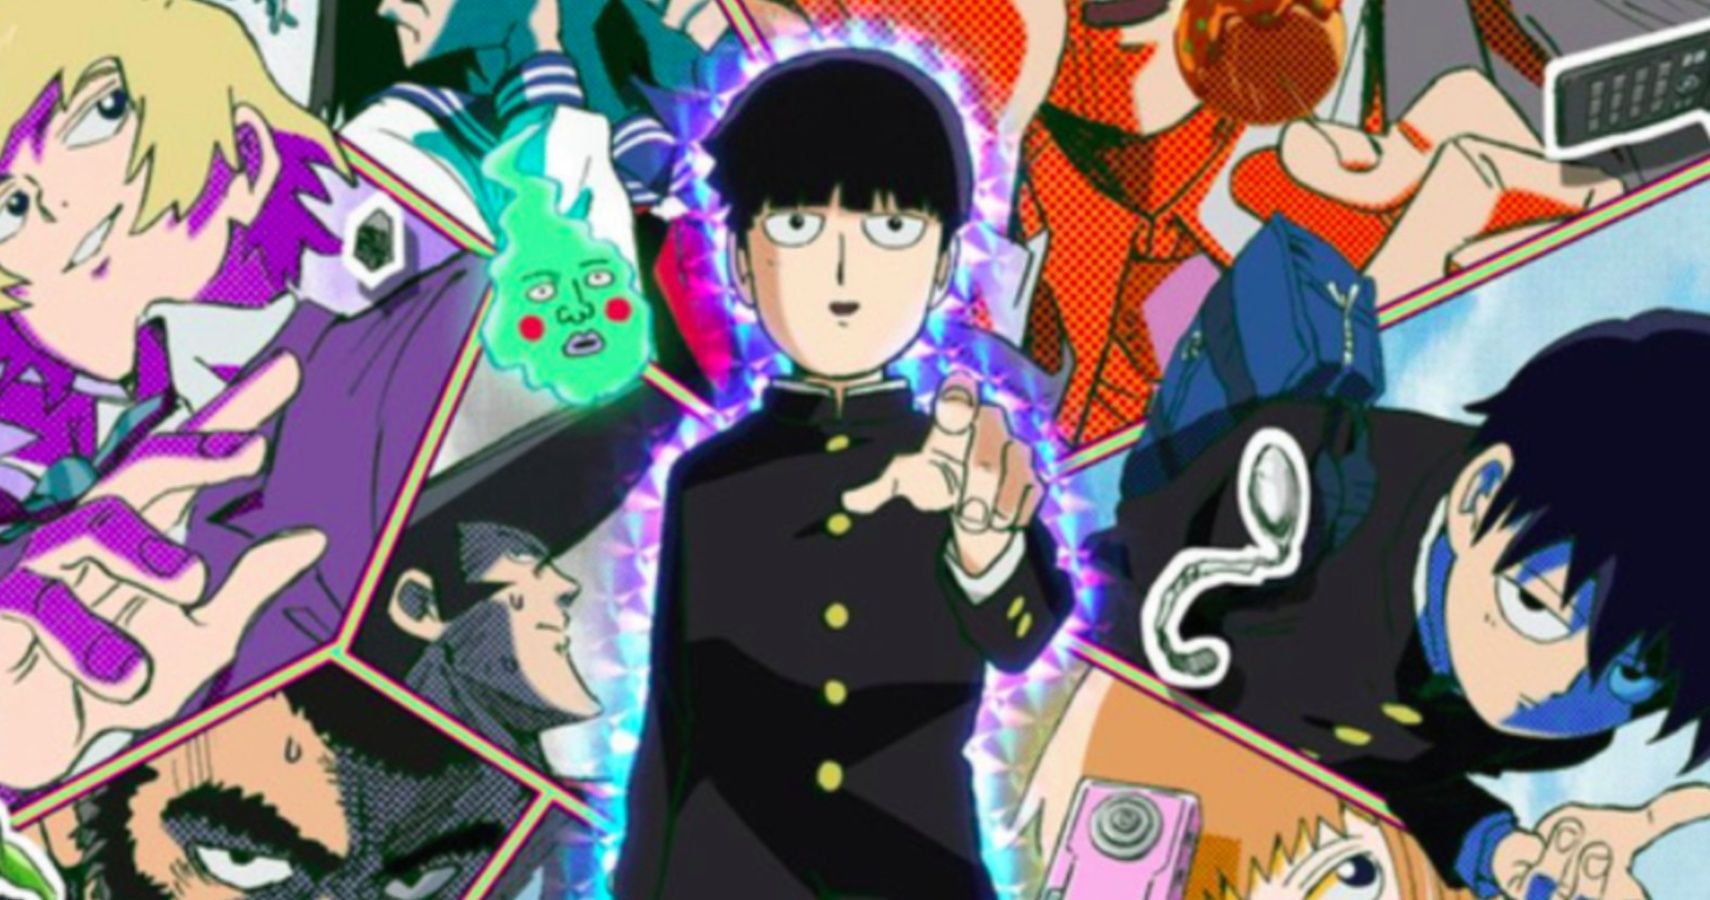 Mob Psycho 100: 10 Hidden Details You Might Have Missed | CBR